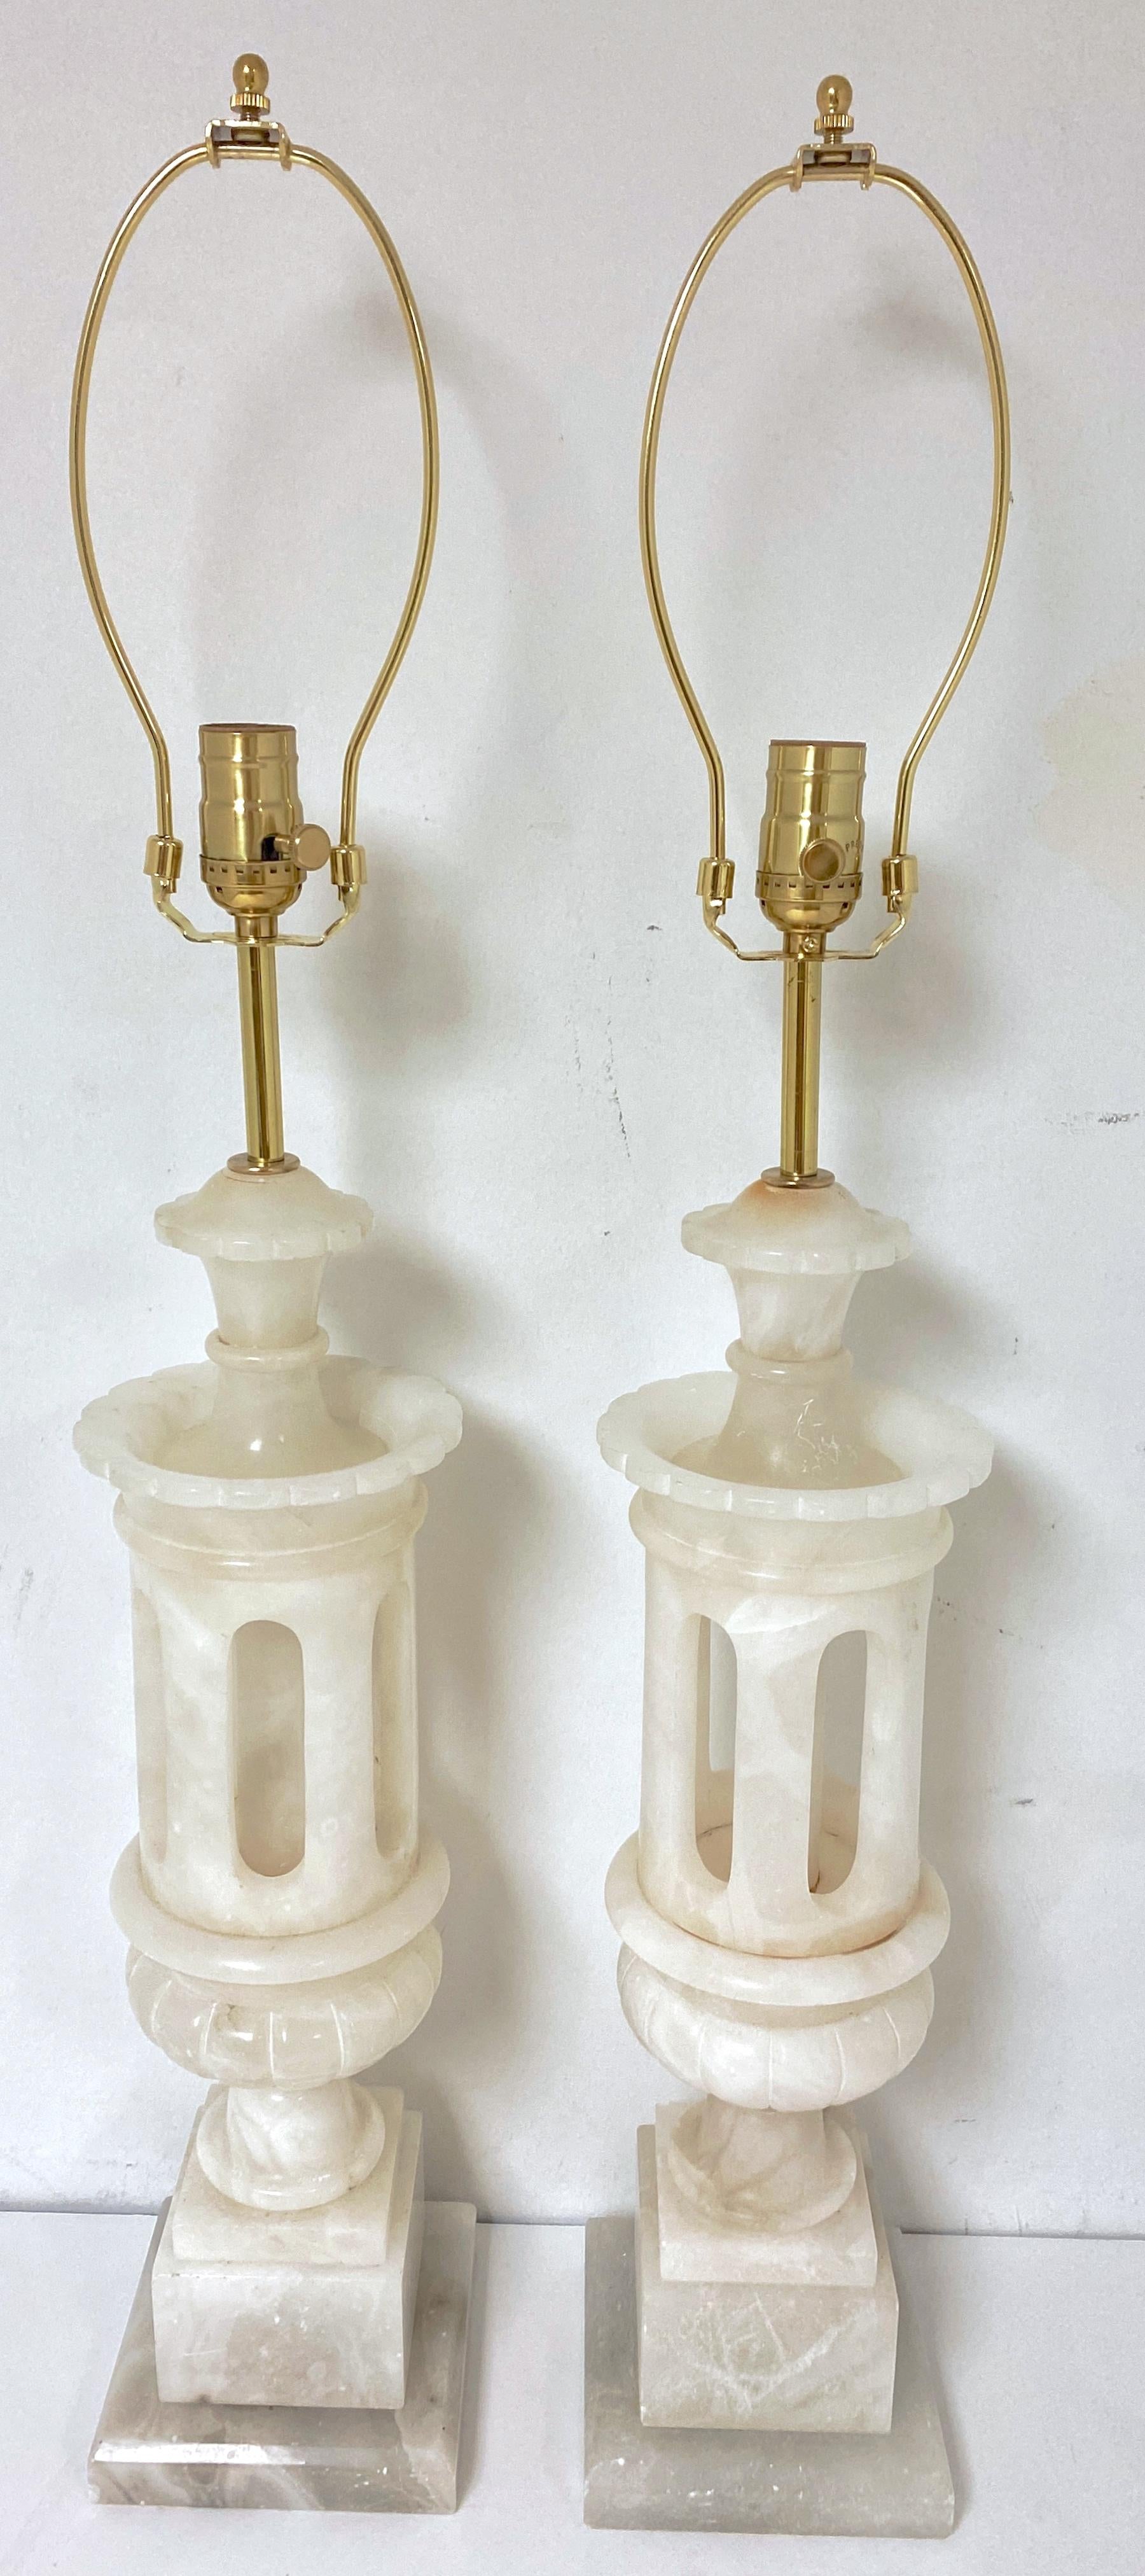 Polished Pair Italian Carved Marble Moorish Architectural Lamps Attrib. Marbro Lamp Co. 